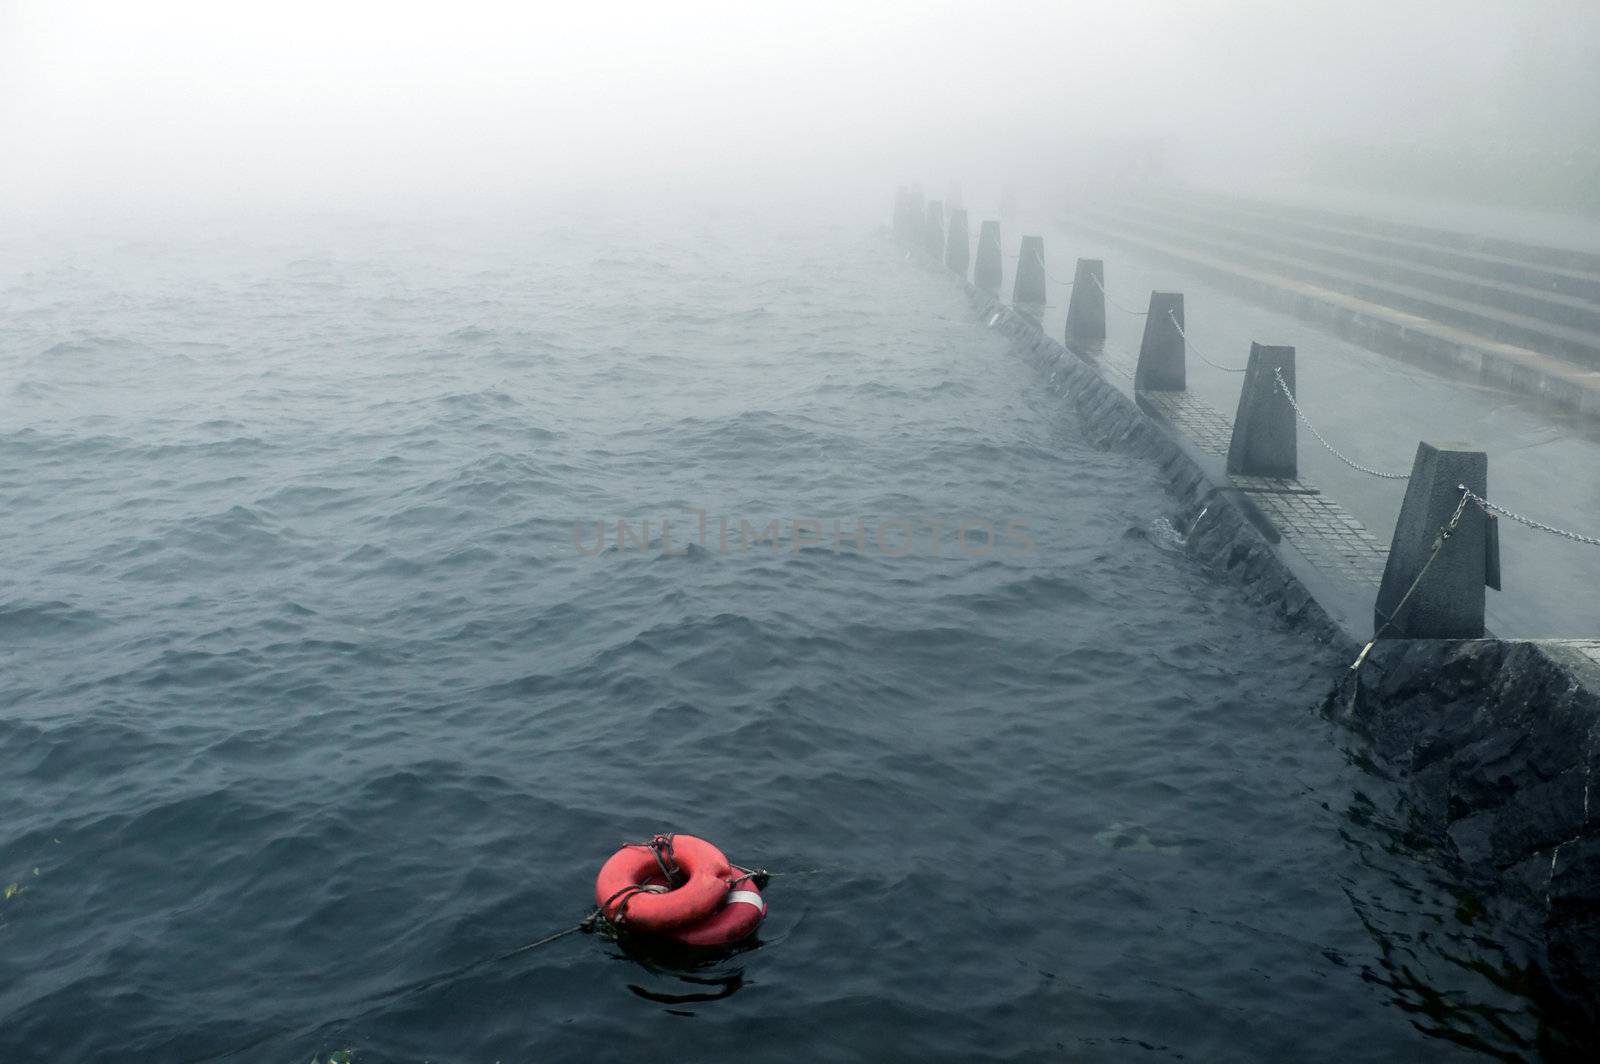 bad weather with mist on the embankment with redlife-buoy on the water